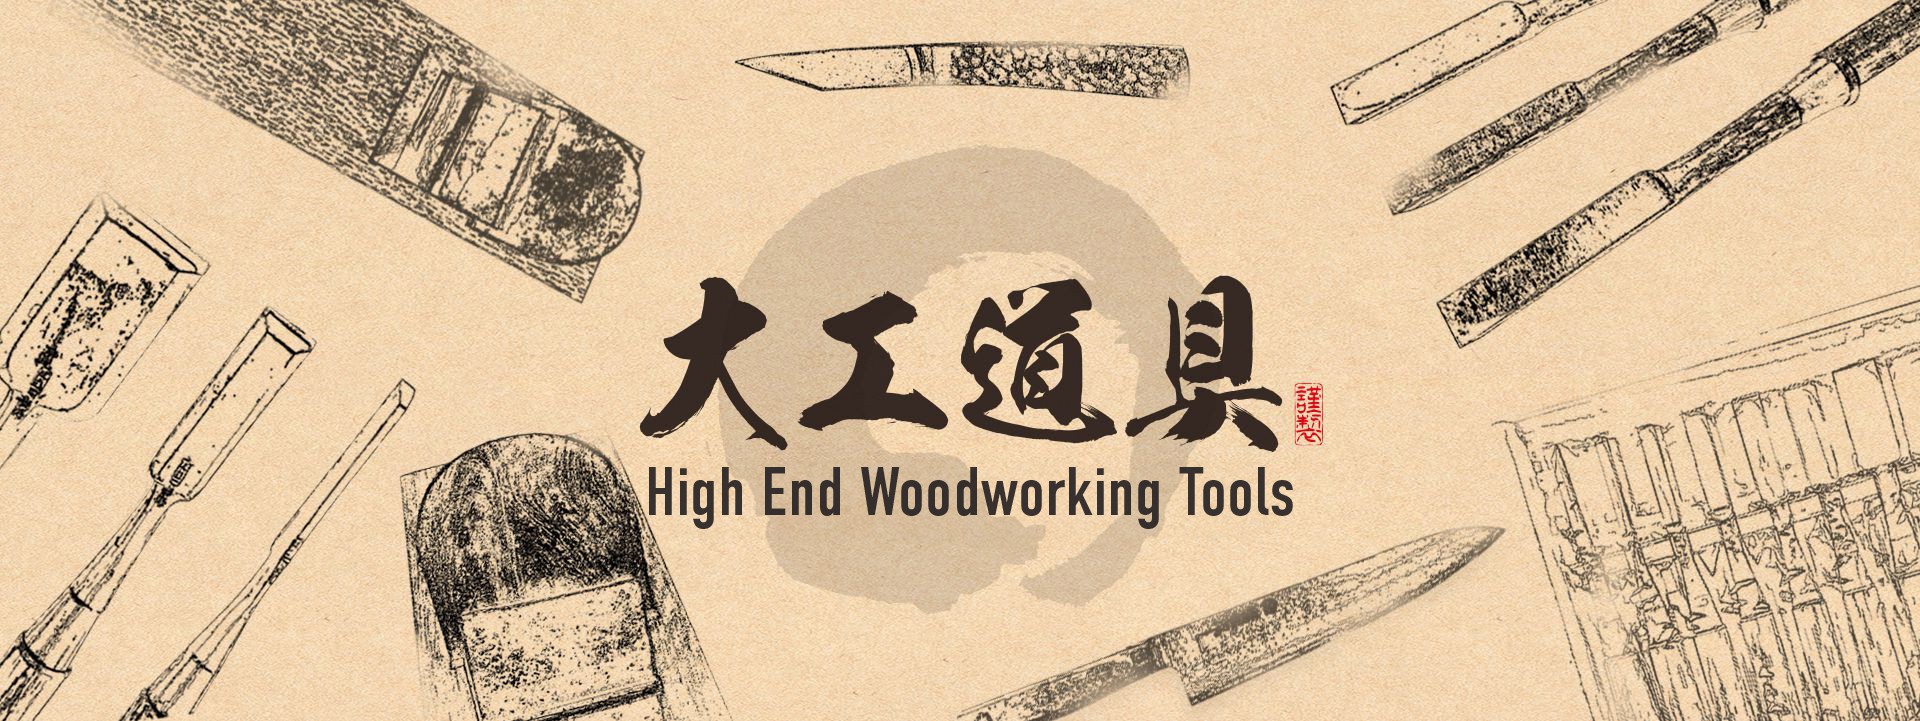 Hida Tool & Hardware Company  Your Source for Authentic Japanese Hand Tools